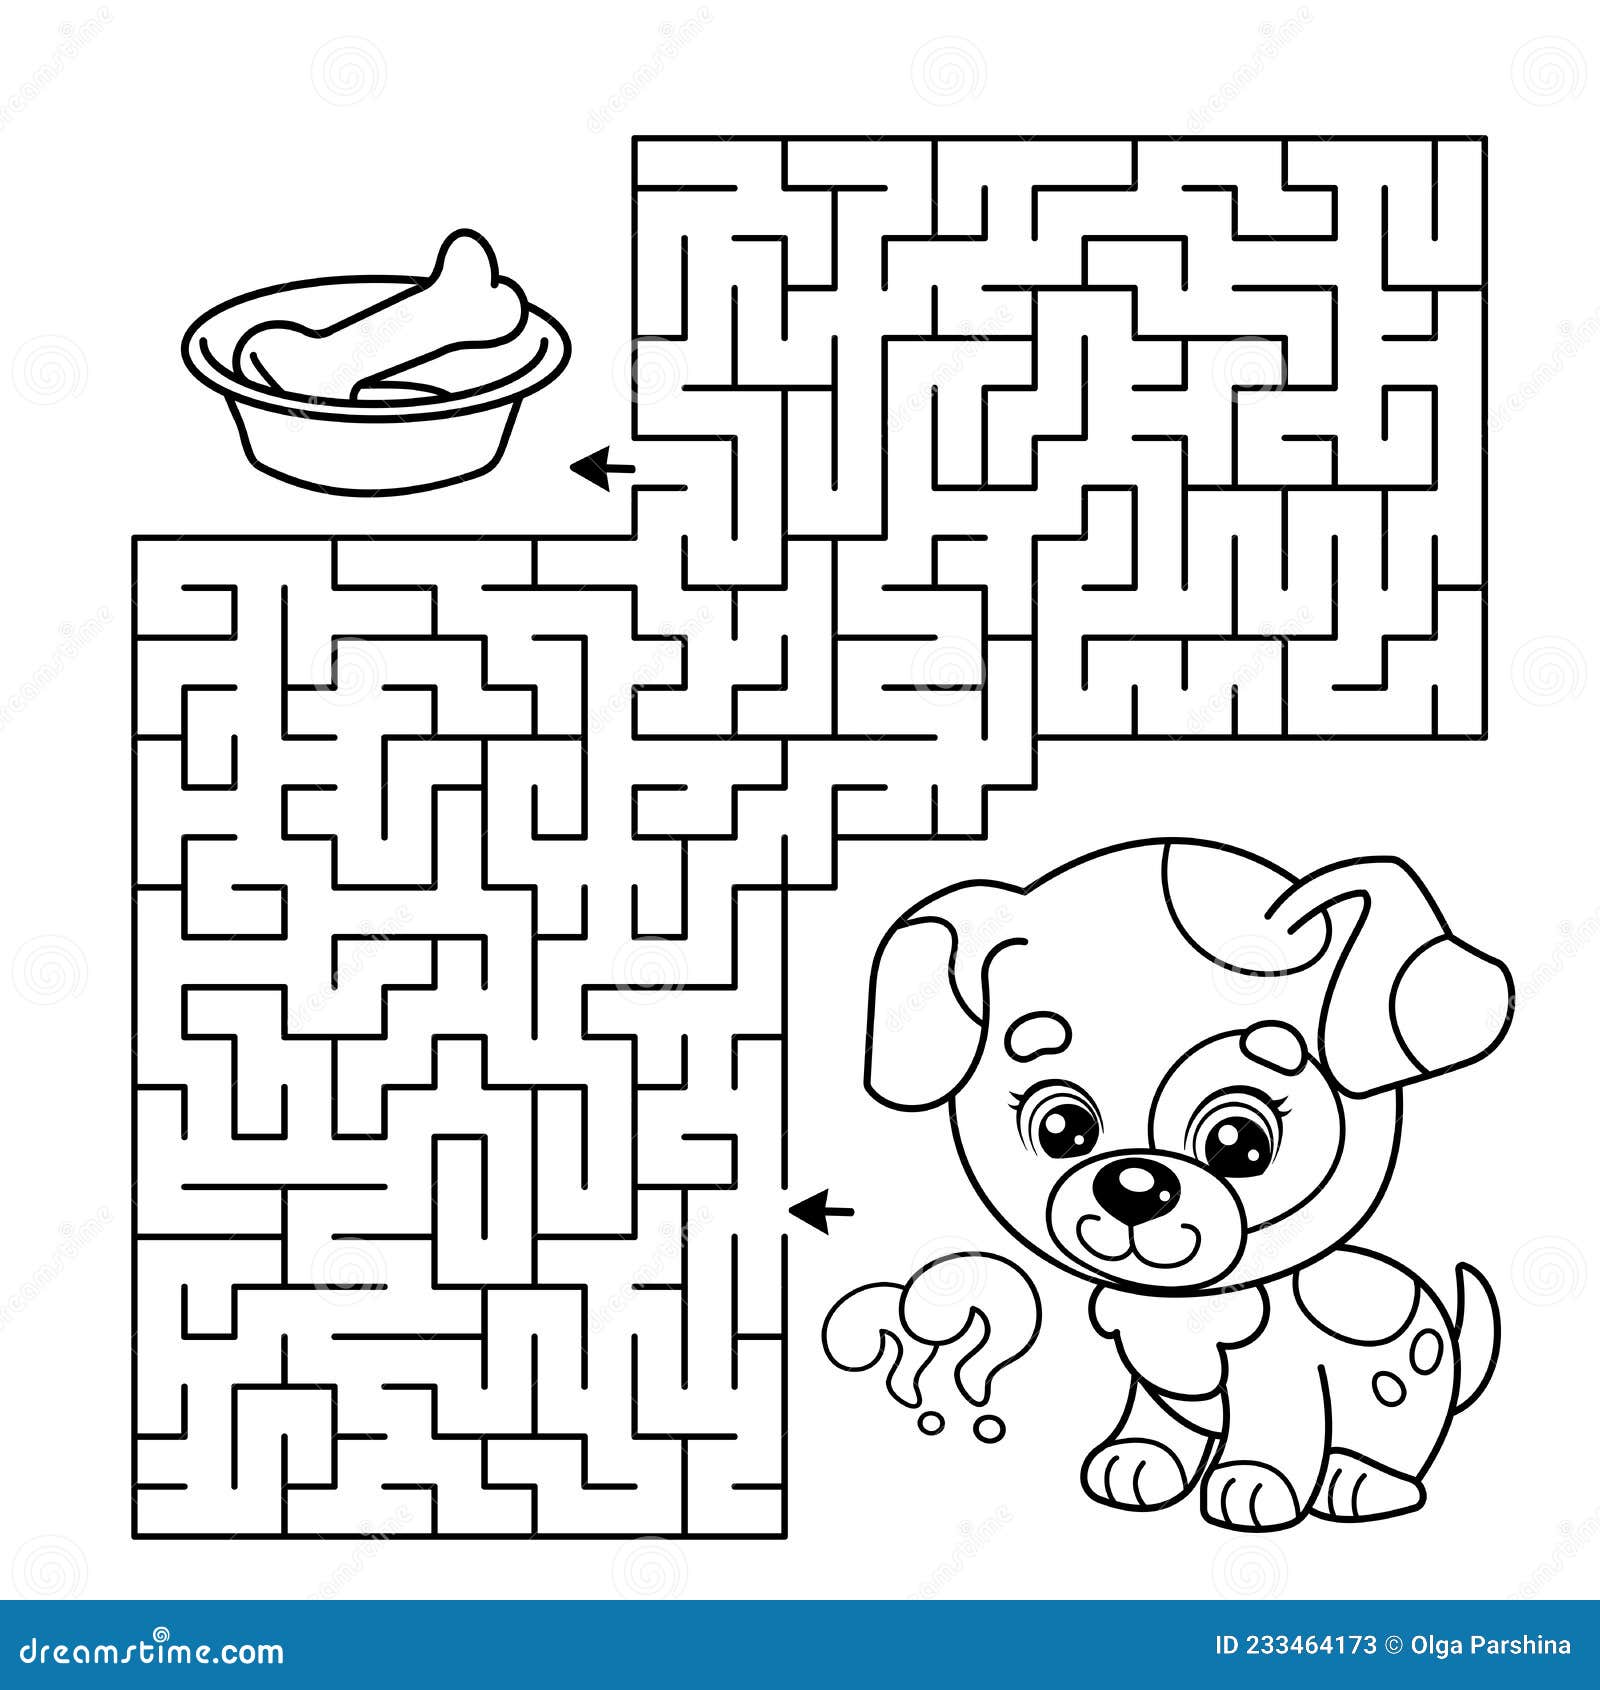 Maze or labyrinth game puzzle coloring page outline of cartoon little dog with bone puppy stock vector